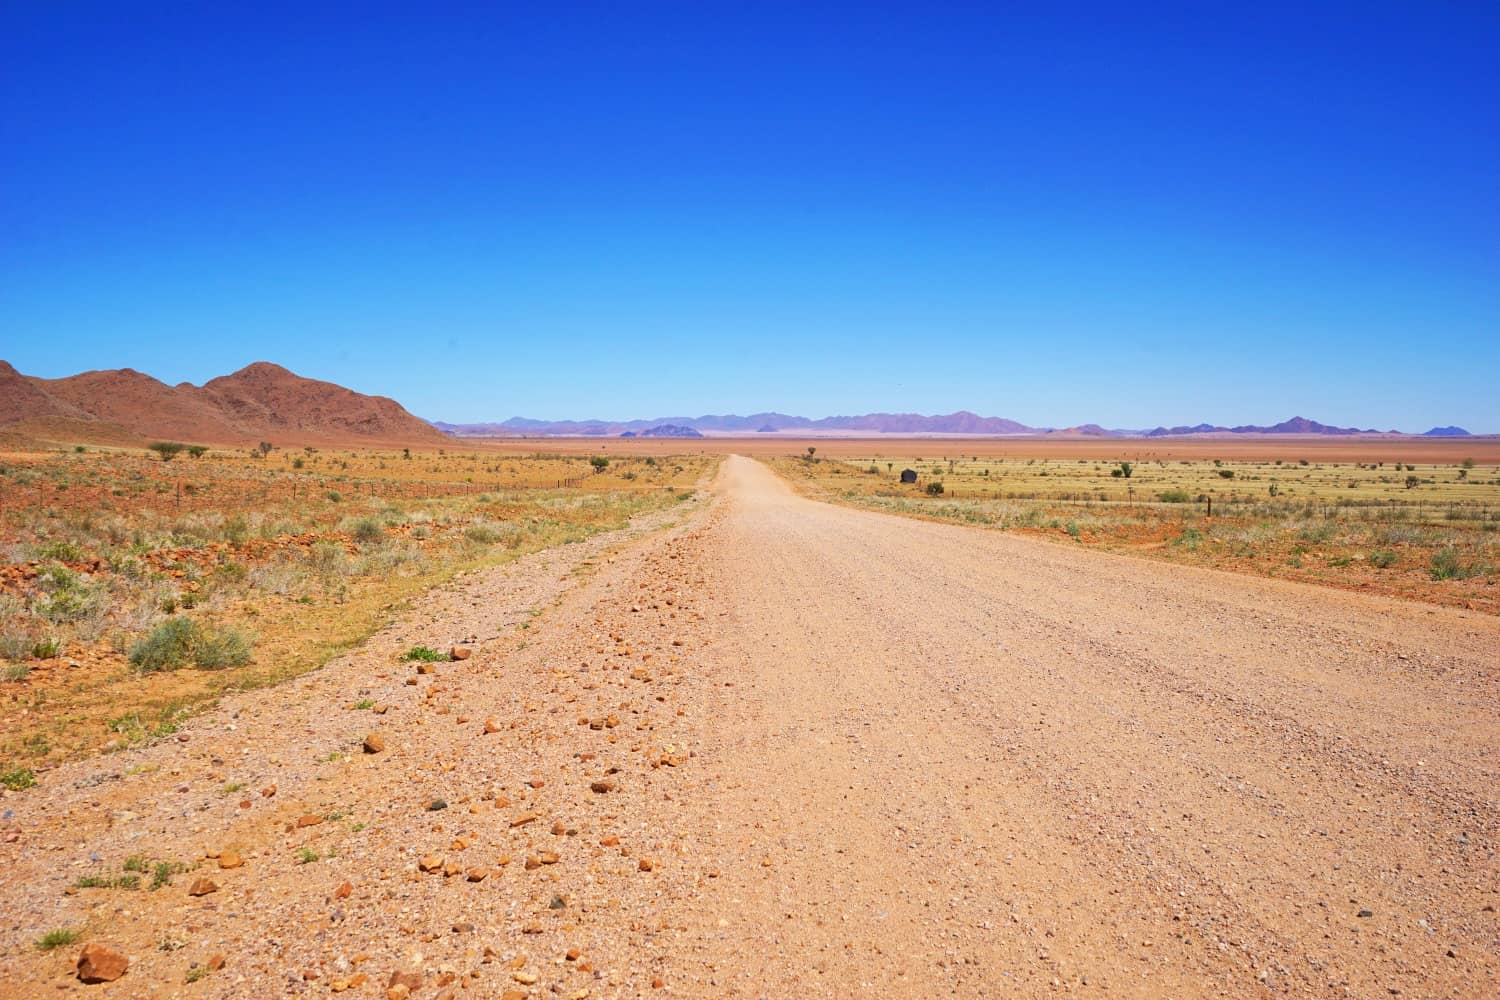 A gravel road in Namibia, with scrubby desert on both sides, hills to the left, and mountains in the distance.